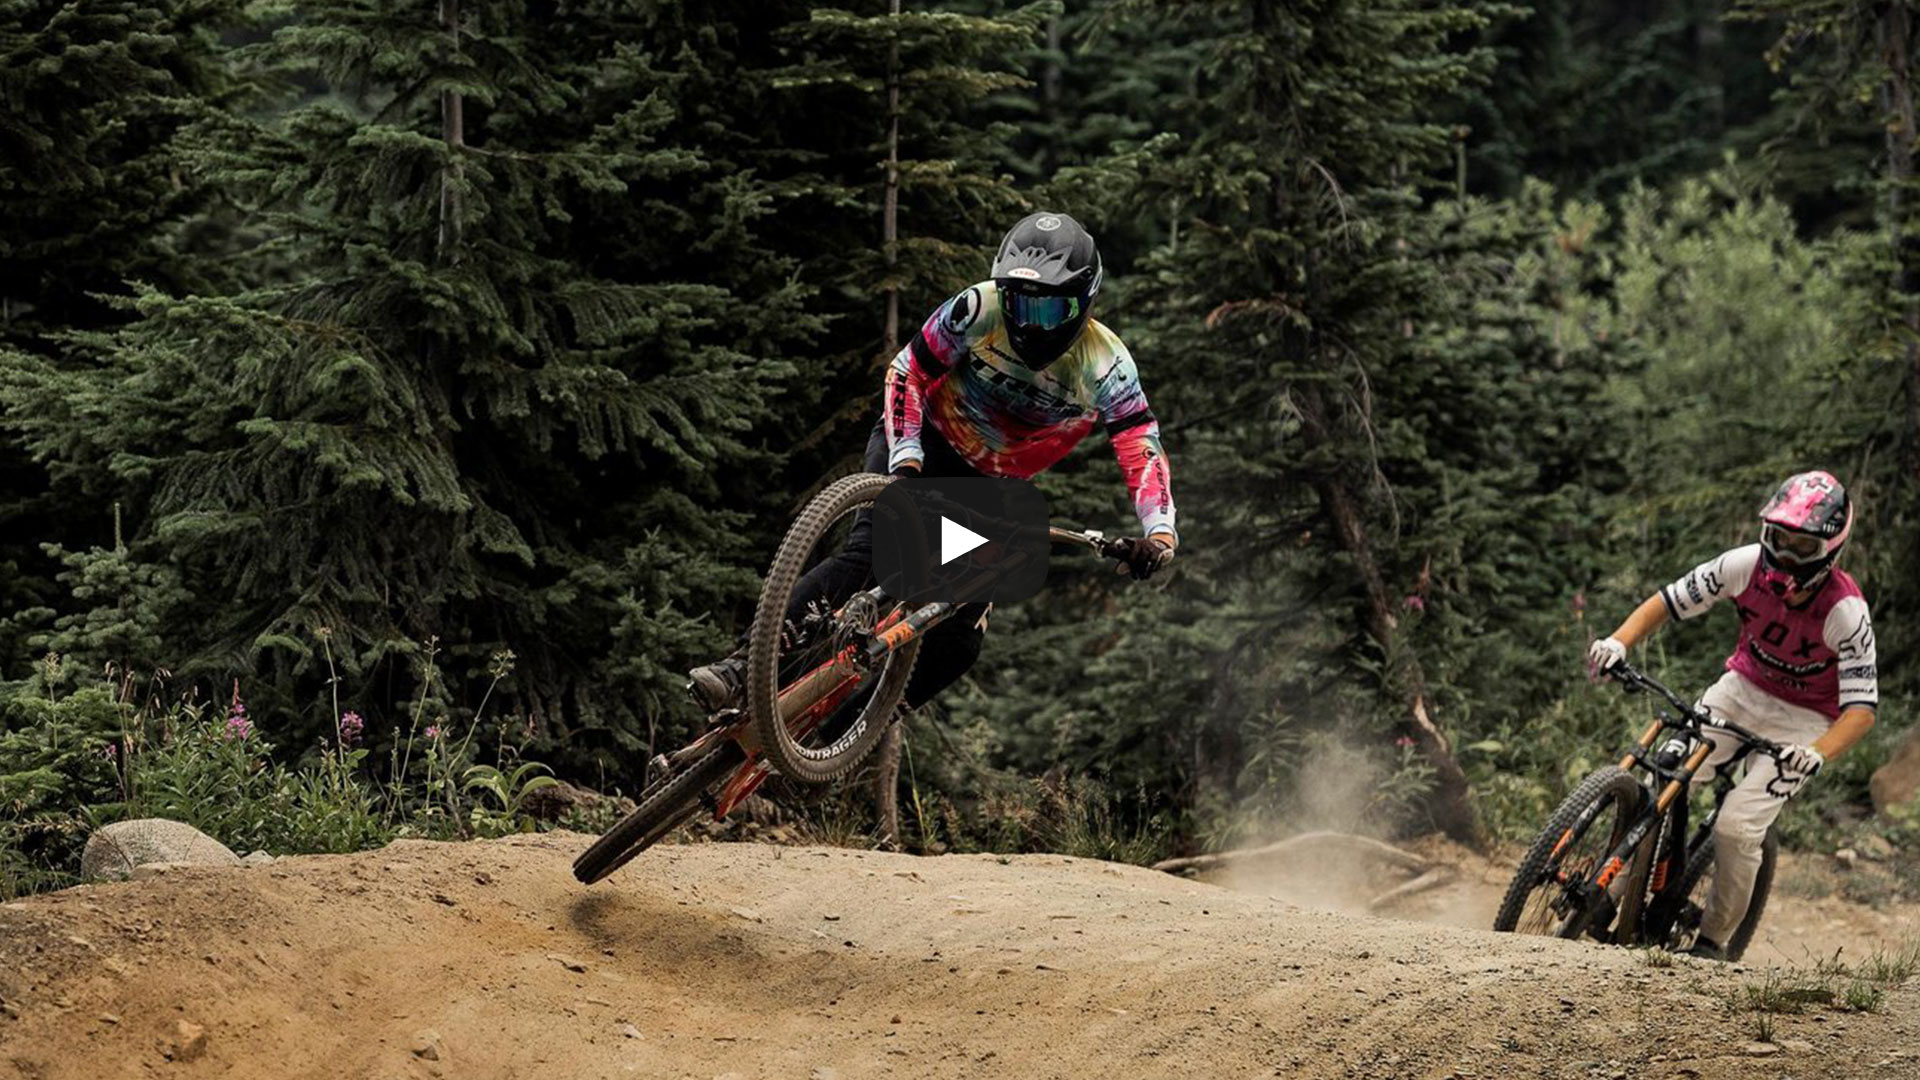 Sound of Speed w/ Kade Edwards and Kaos Seagrave Red Bull Bike